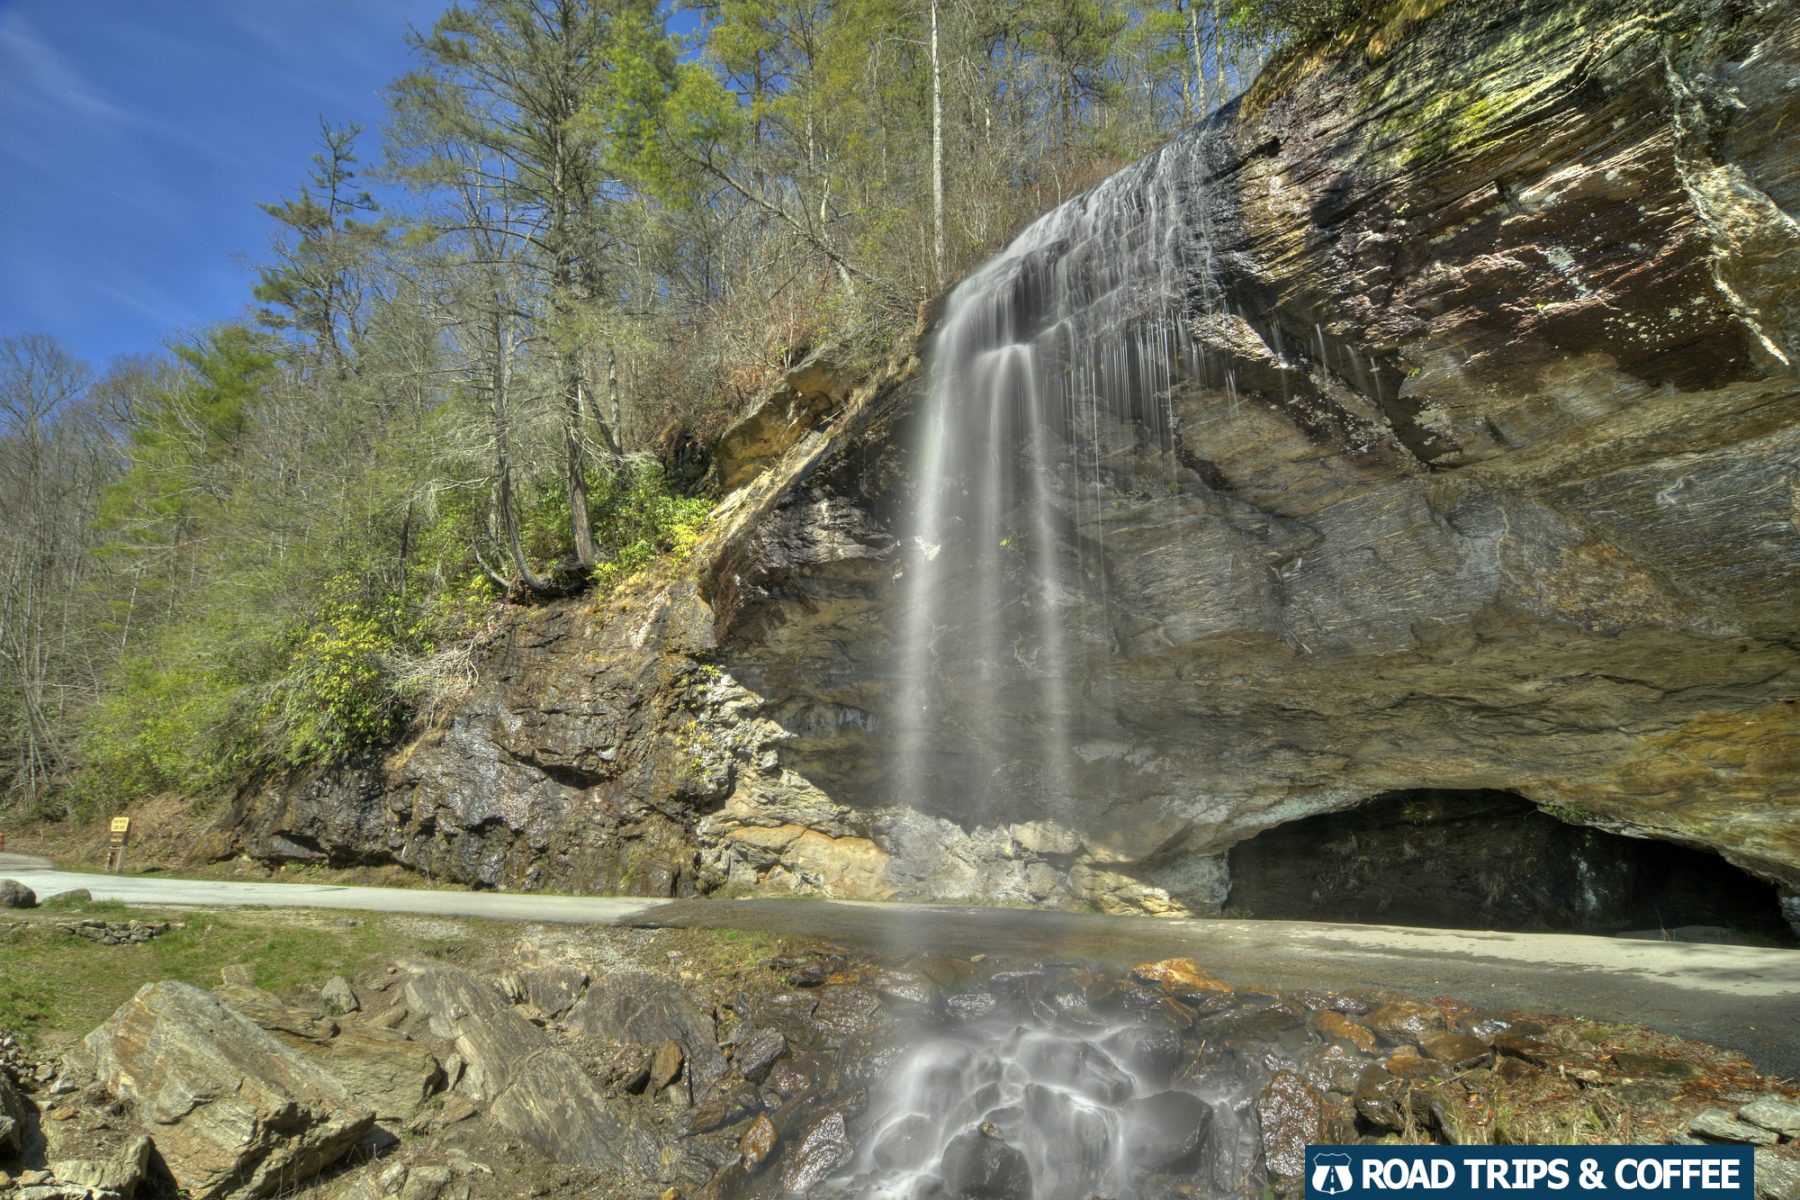 Water spills over a ledge across a narrow paved road at Bridal Veil Falls in Highlands, North Carolina